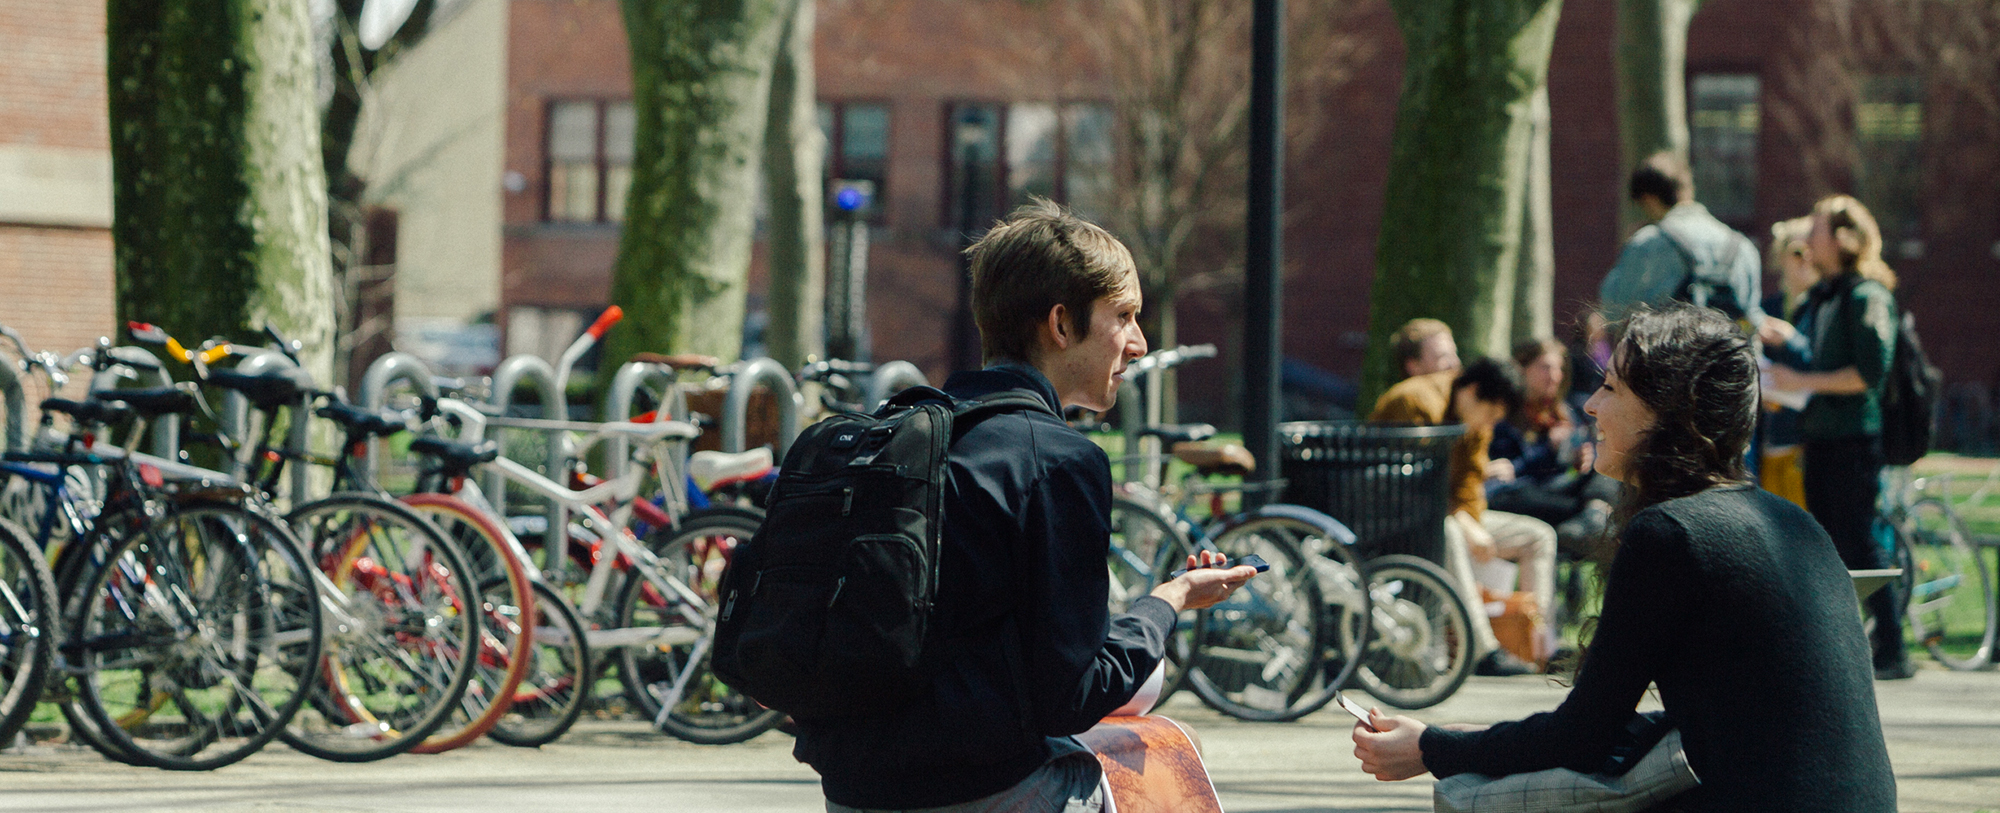 Tow students chat while sitting in front of a bike rack packed with bikes